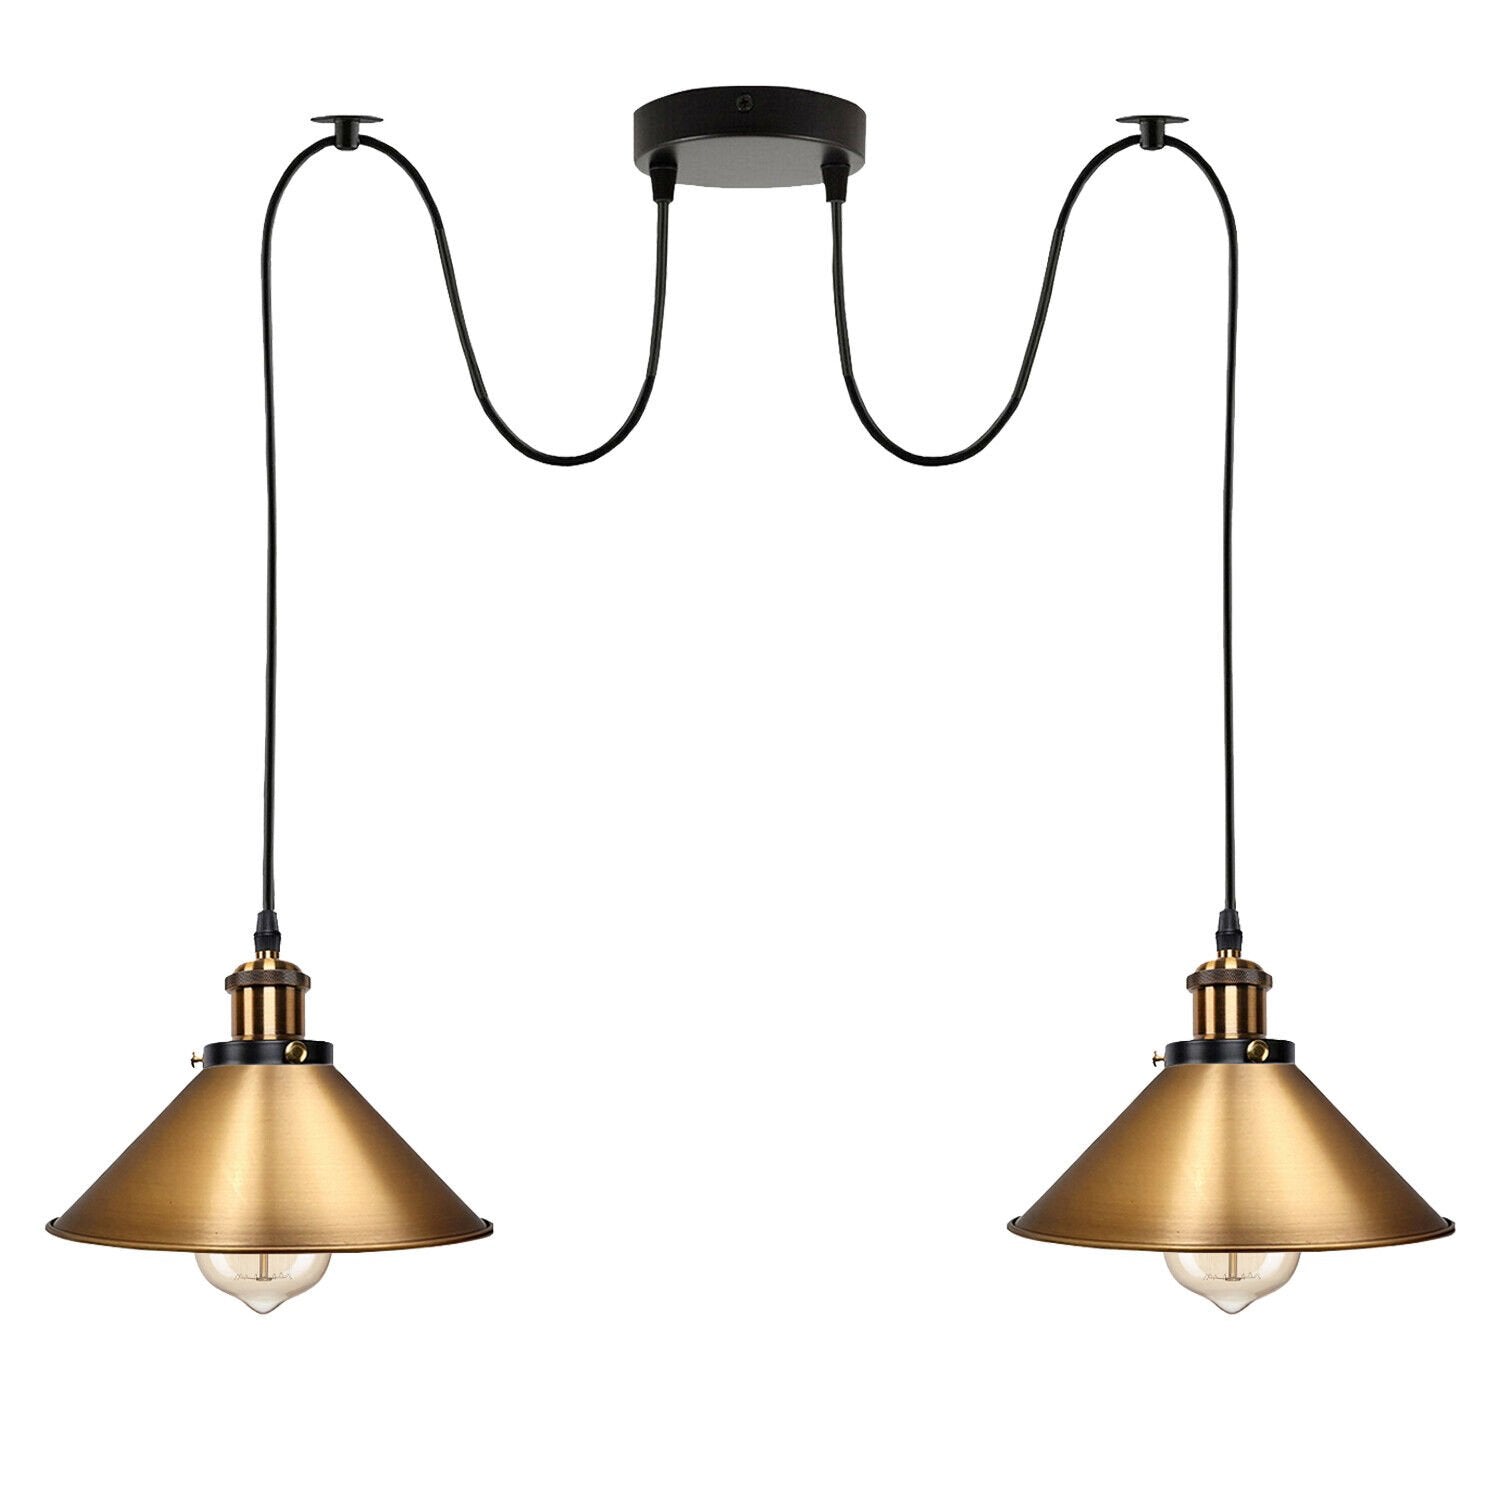 2 way ceiling hanging pendant Light With Bulb